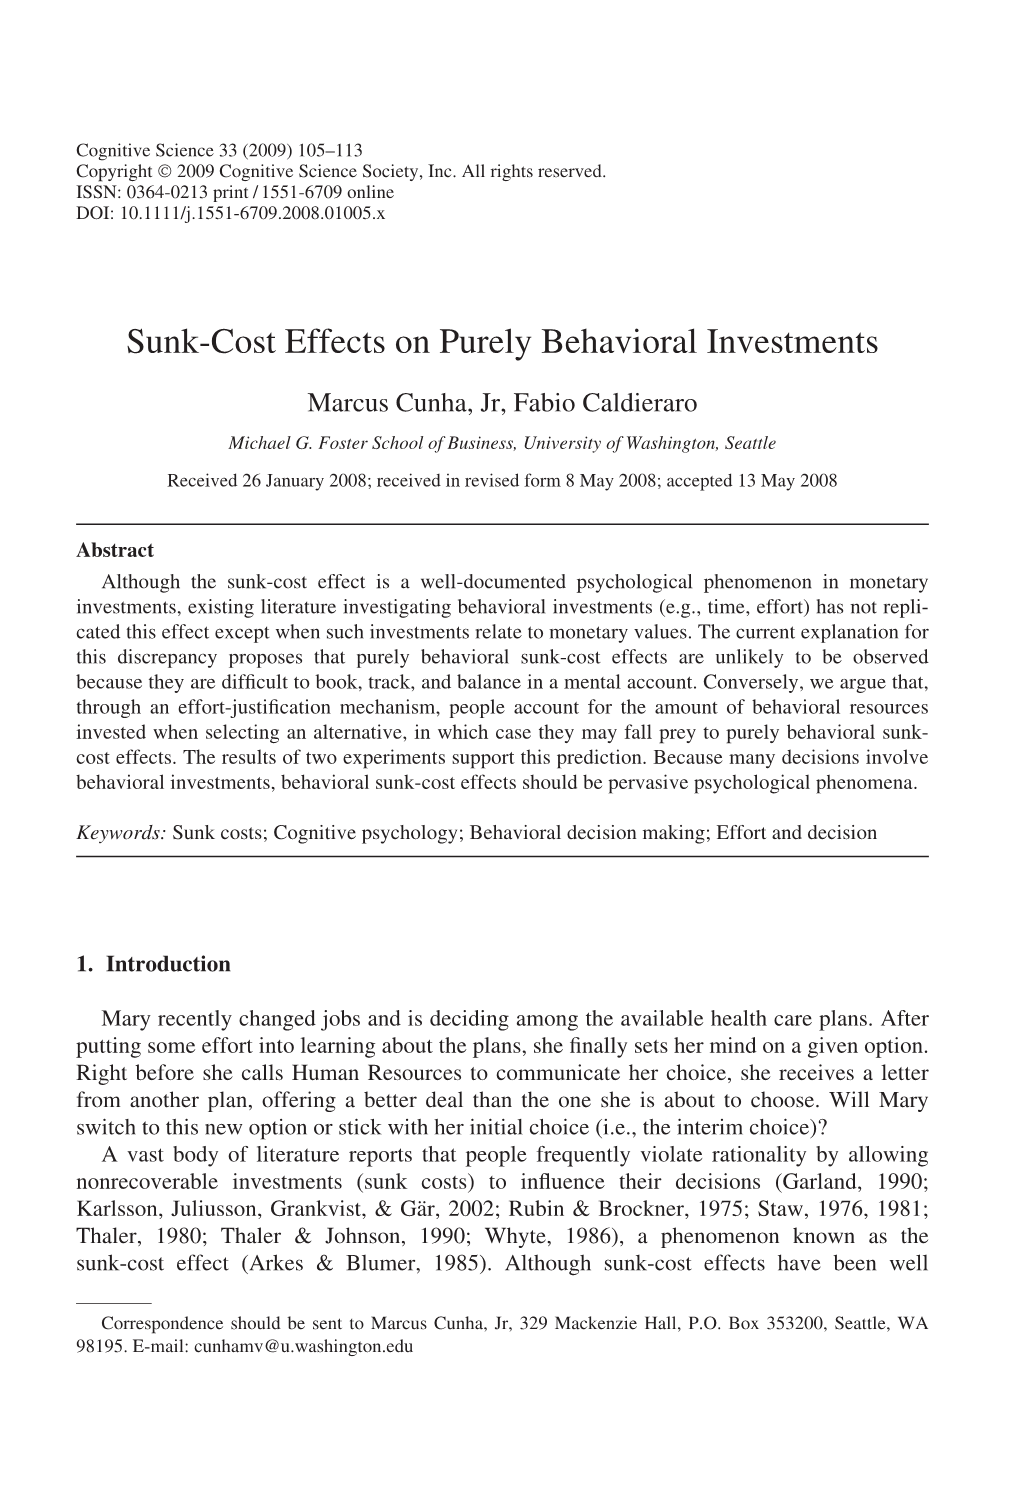 Sunk-Cost Effects on Purely Behavioral Investments